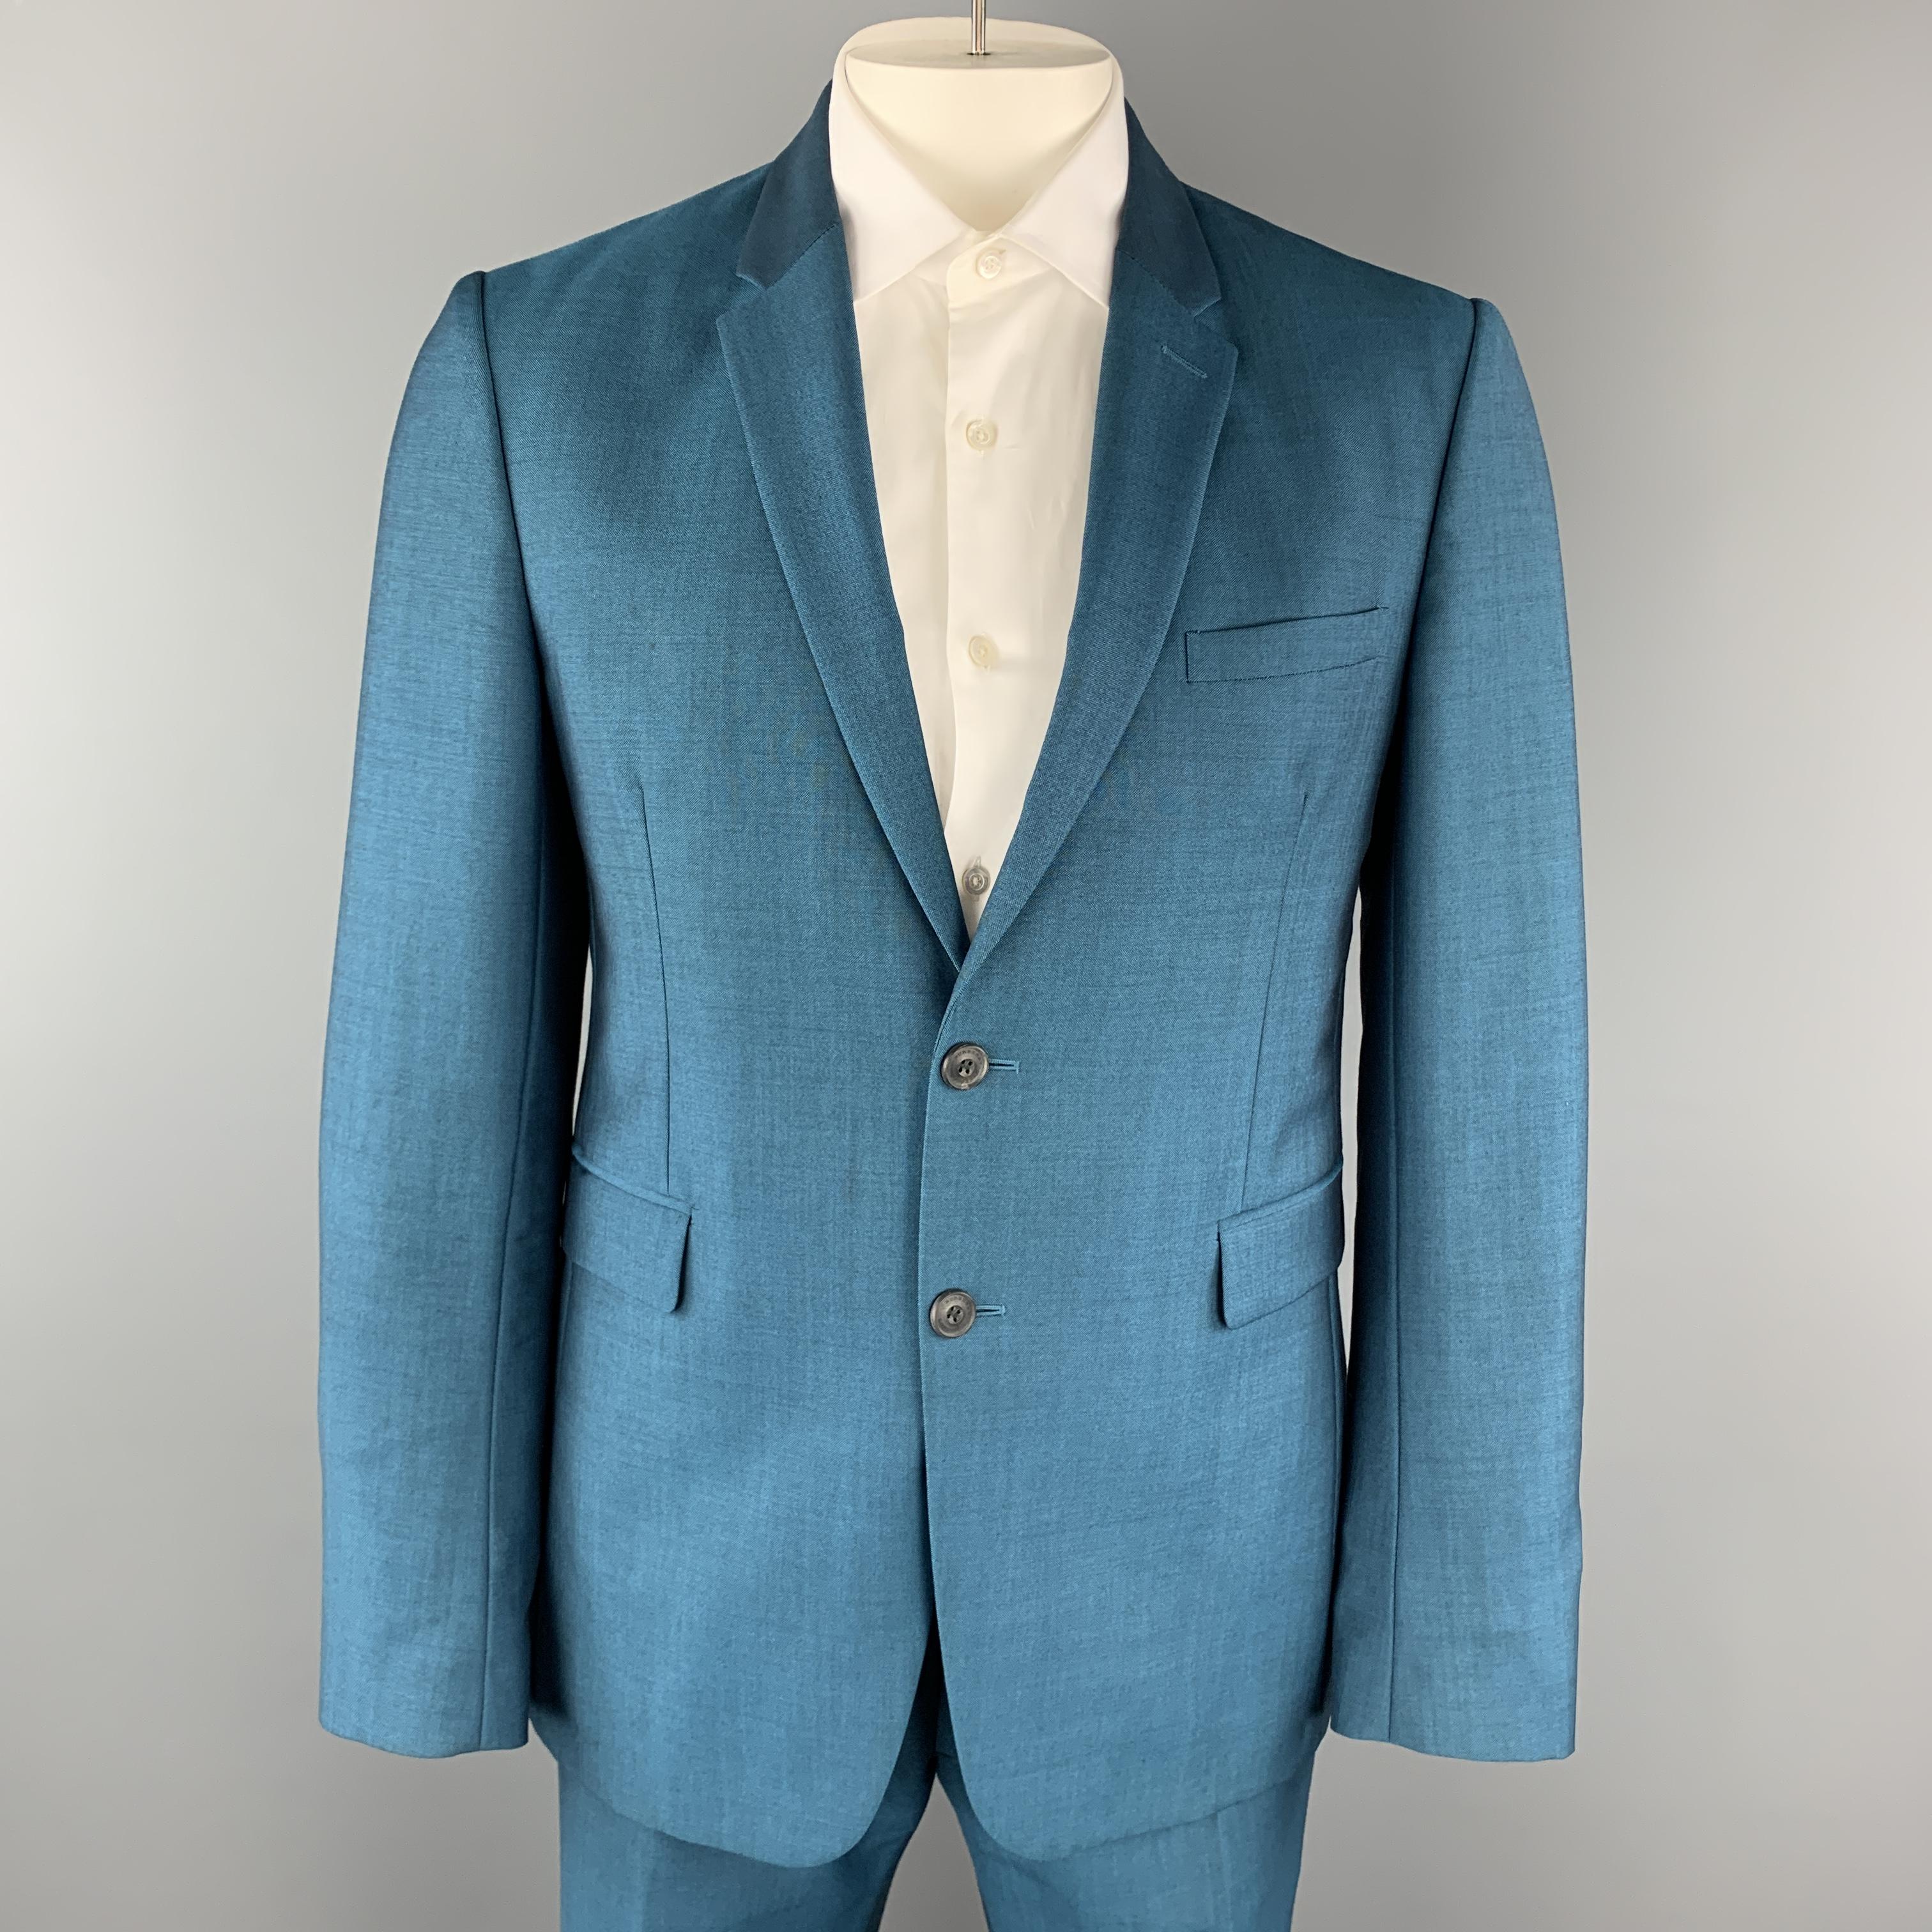 BURBERRY LONDON suit comes in a bold teal blue wool mohair blend sharkskin and includes a single breasted, two button sport coat with a notch lapel and matching flat front trousers. Spot on blazer. As-is. Made in Portugal.

Excellent Pre-Owned